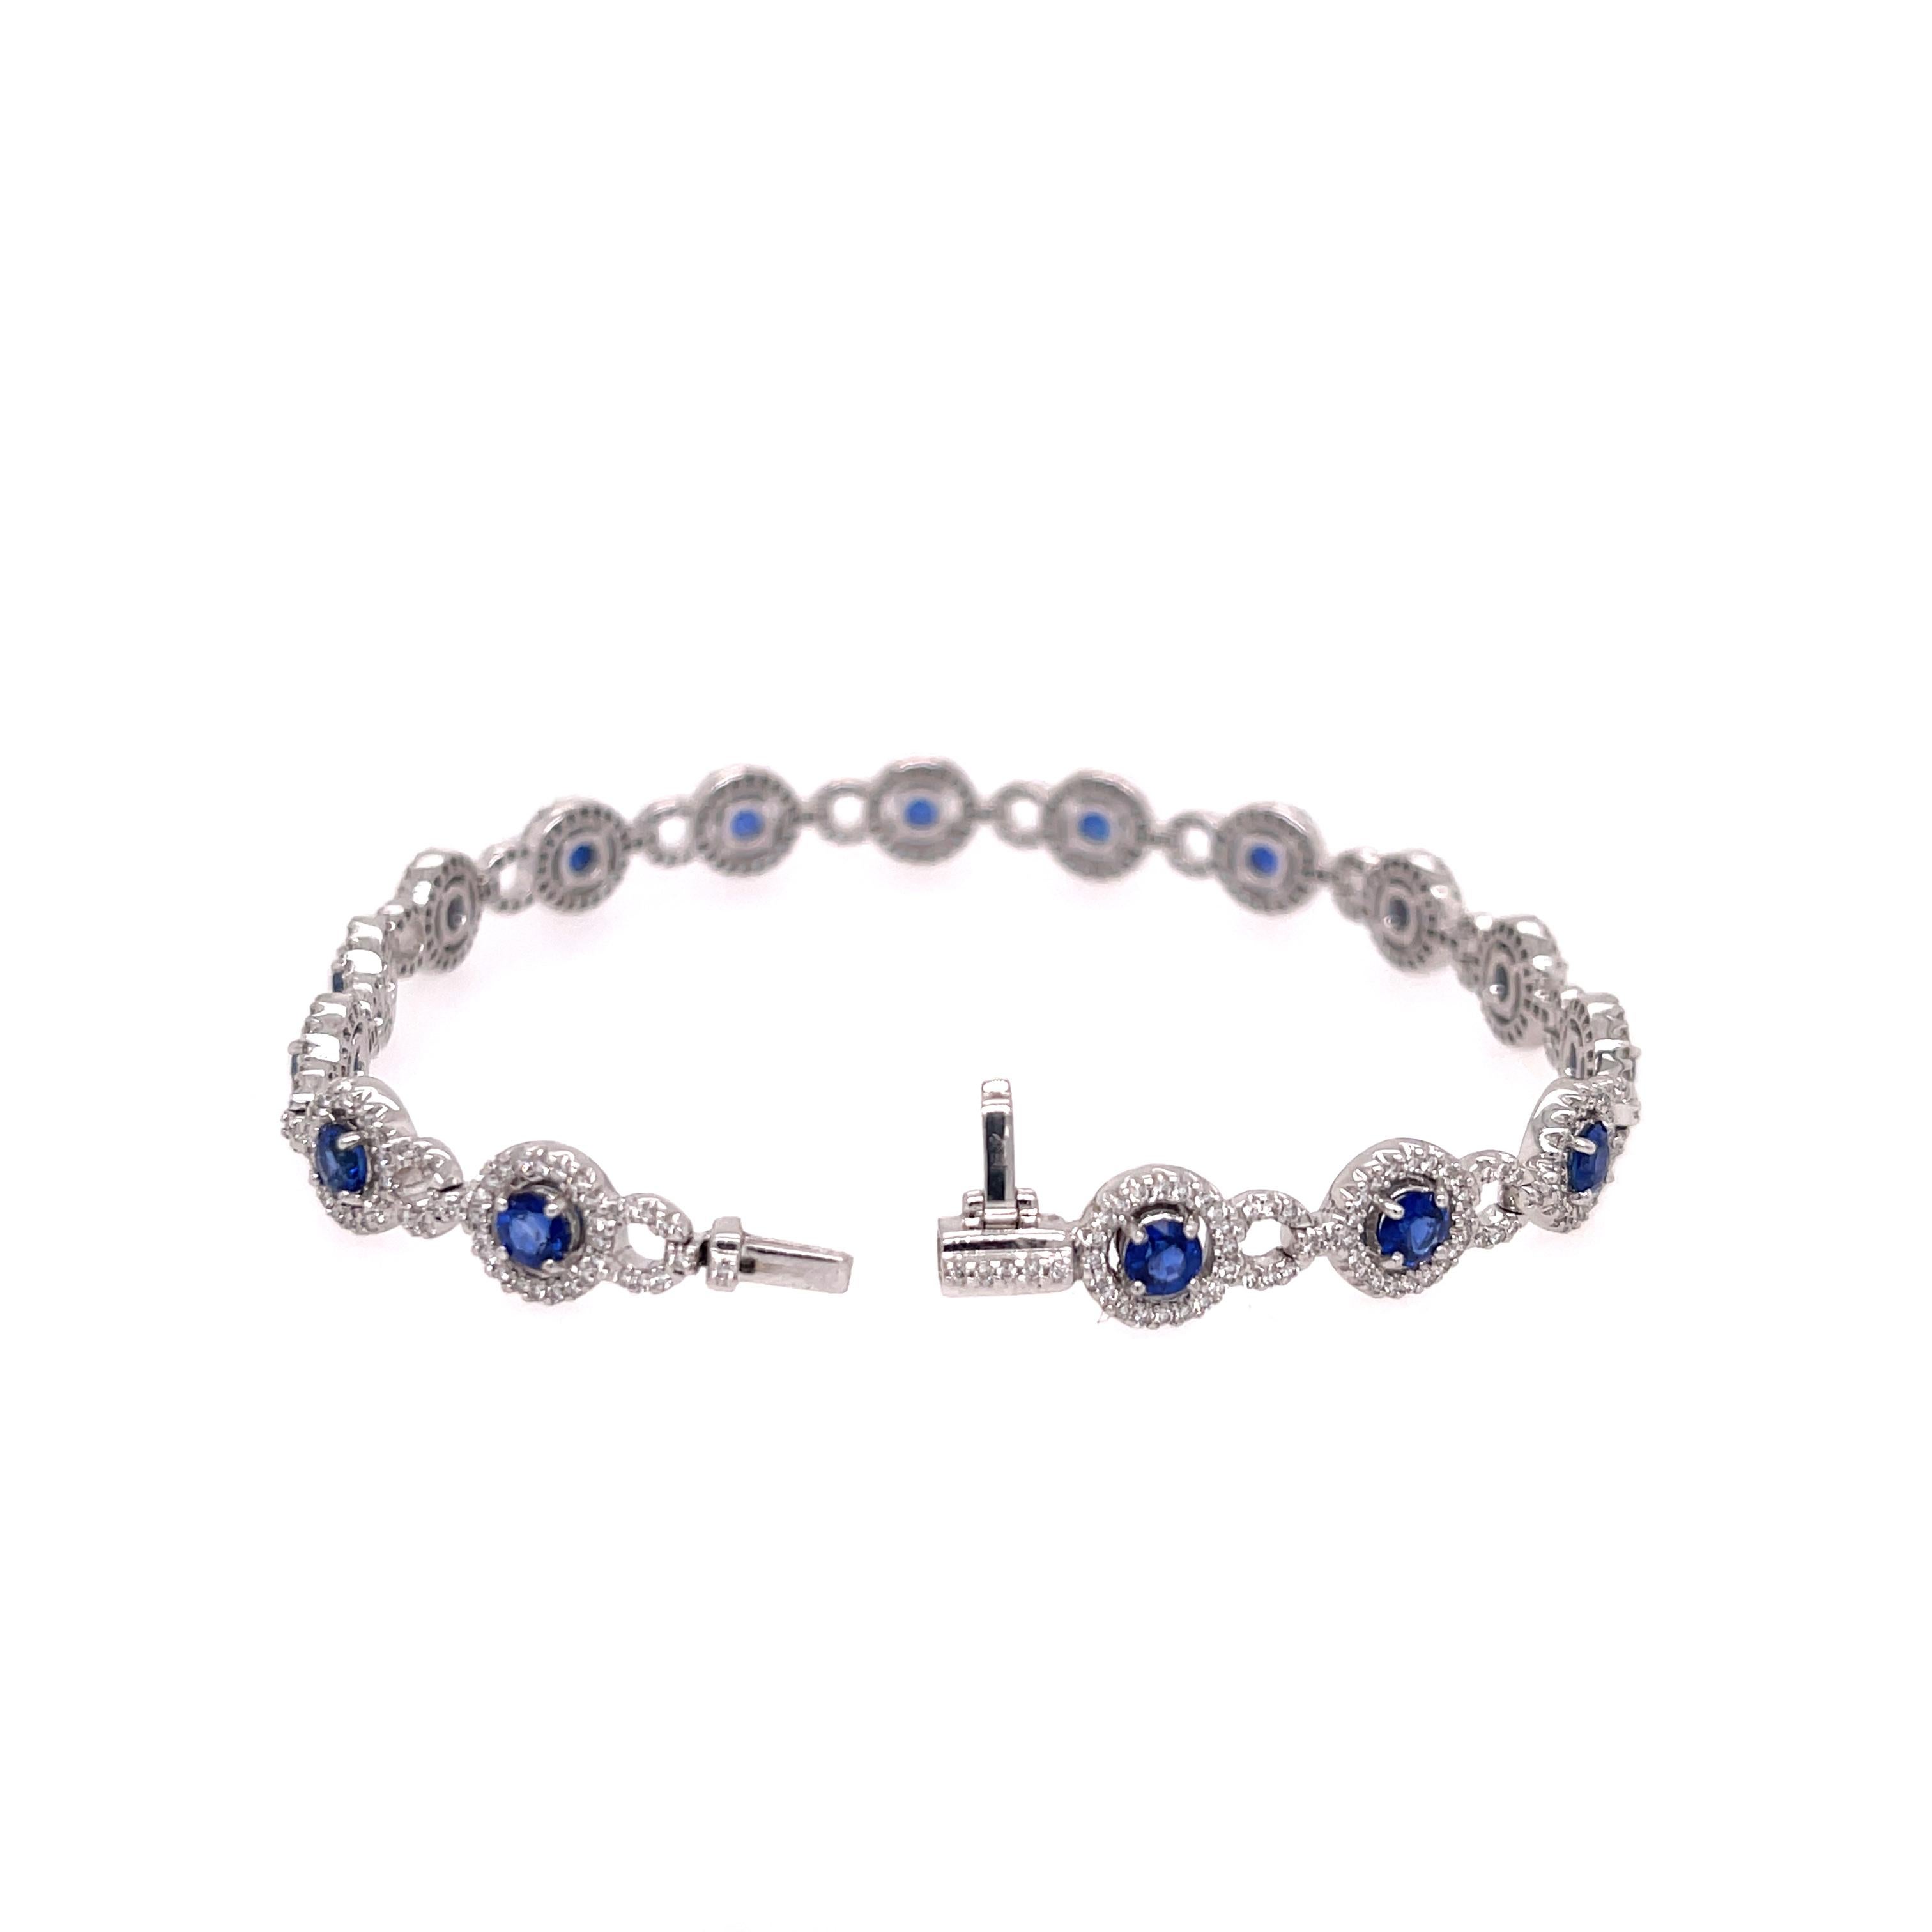 Sapphire and diamond bracelet in 18K white gold. The bracelet features 16 round cut sapphires and 453 round cut diamonds with a 1.5ctw. Stamped 750 18k.